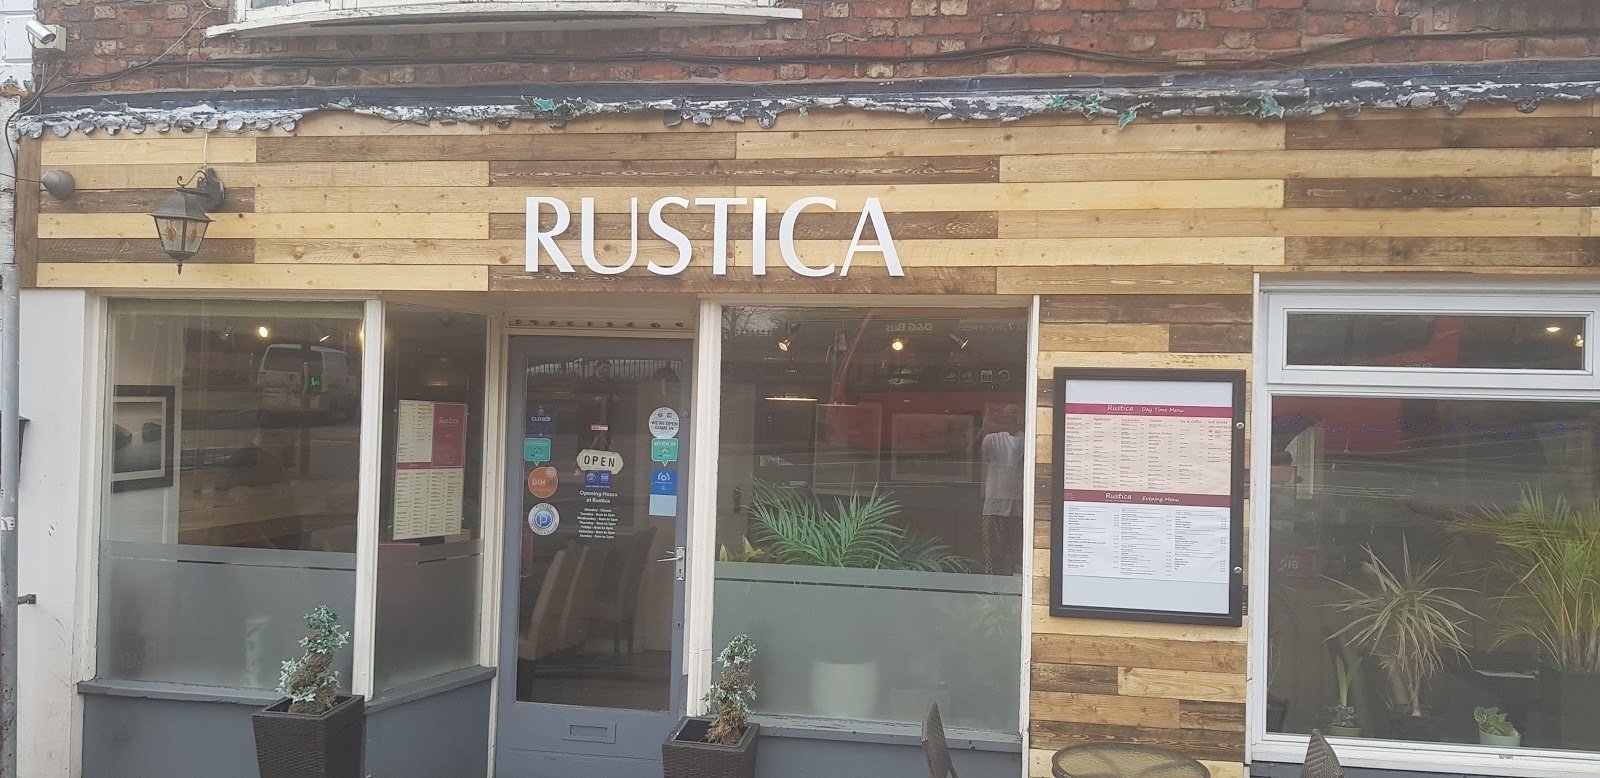 <span class="translation_missing" title="translation missing: en.meta.location_title, location_name: Rustica, city: Macclesfield">Location Title</span>